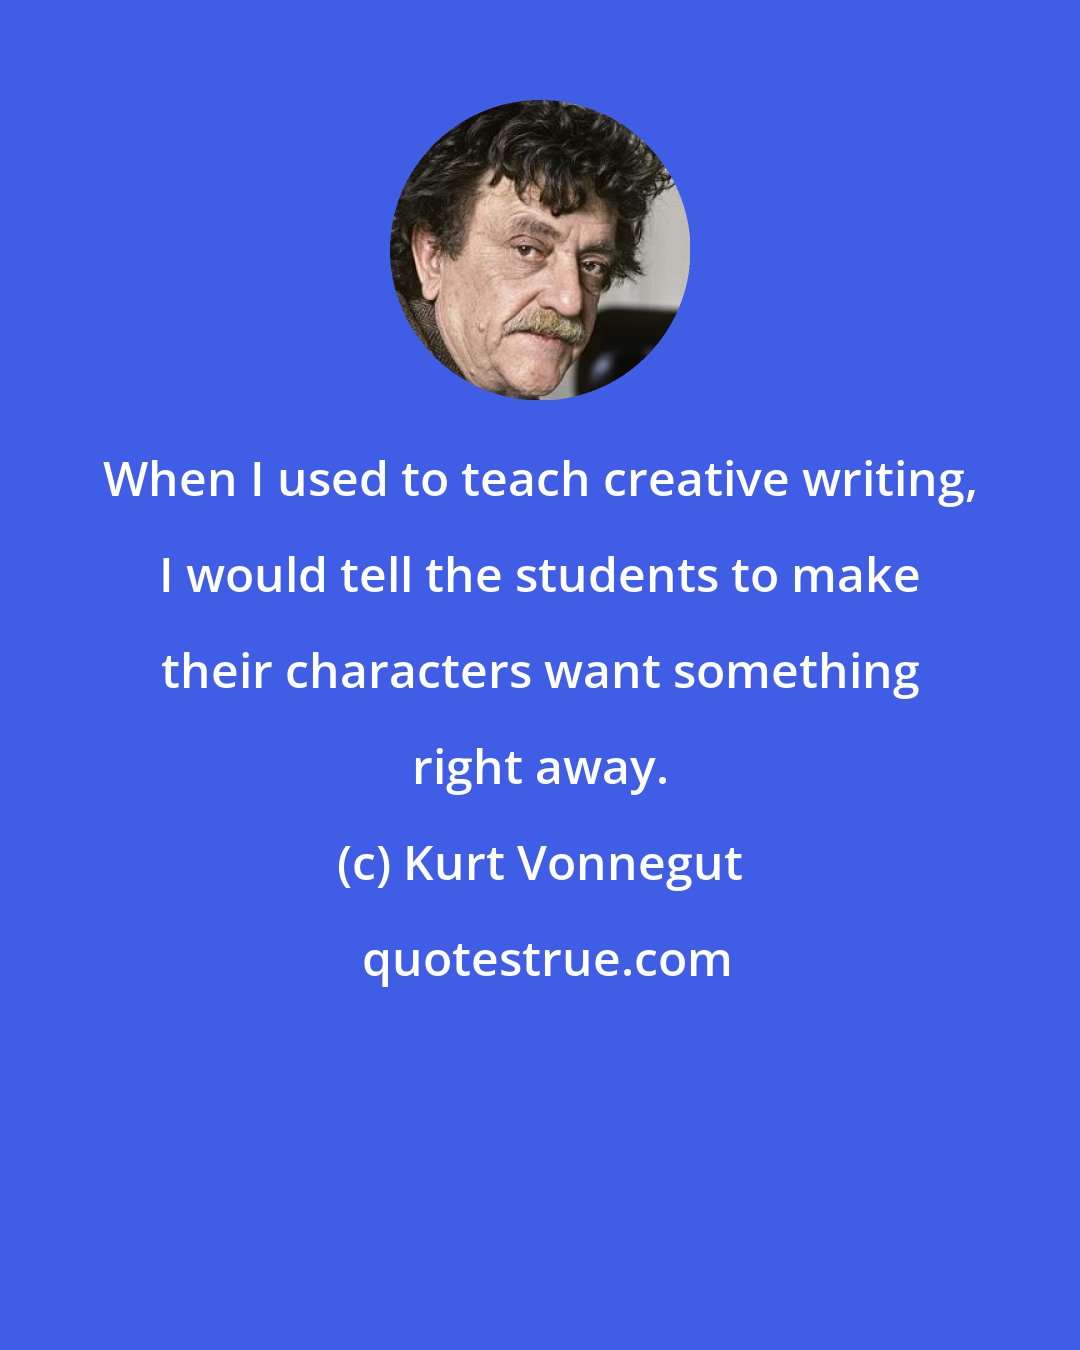 Kurt Vonnegut: When I used to teach creative writing, I would tell the students to make their characters want something right away.